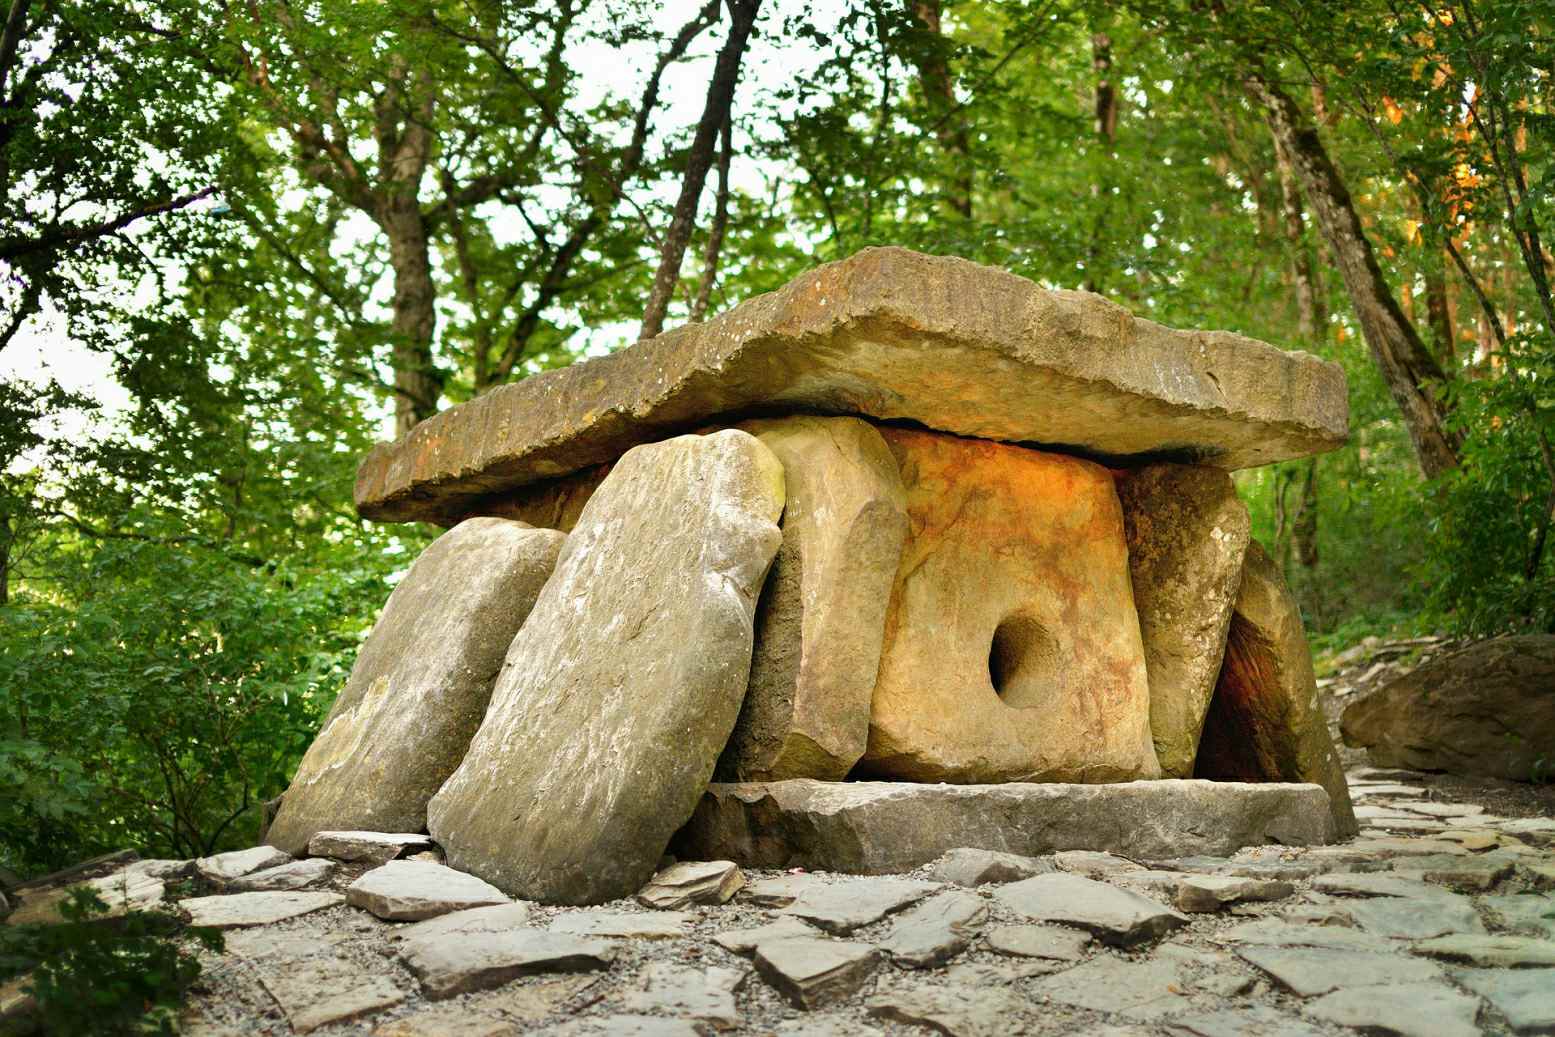 Burial dolmens continued to be used in the Late Bronze and Early Iron Ages